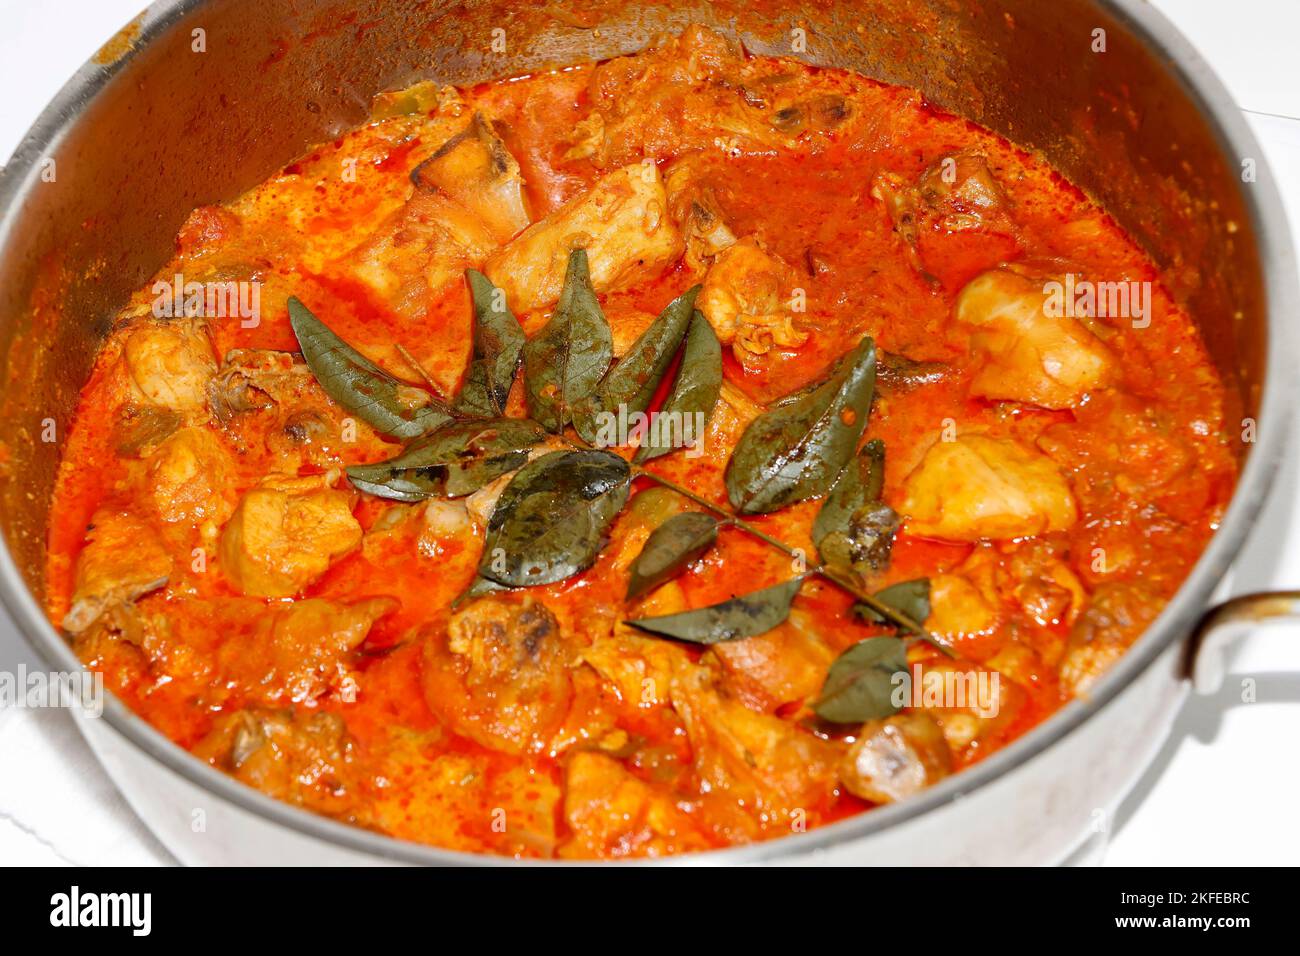 Closeup Image Of Spicy Kerala Style Chicken Curry Stock Photo